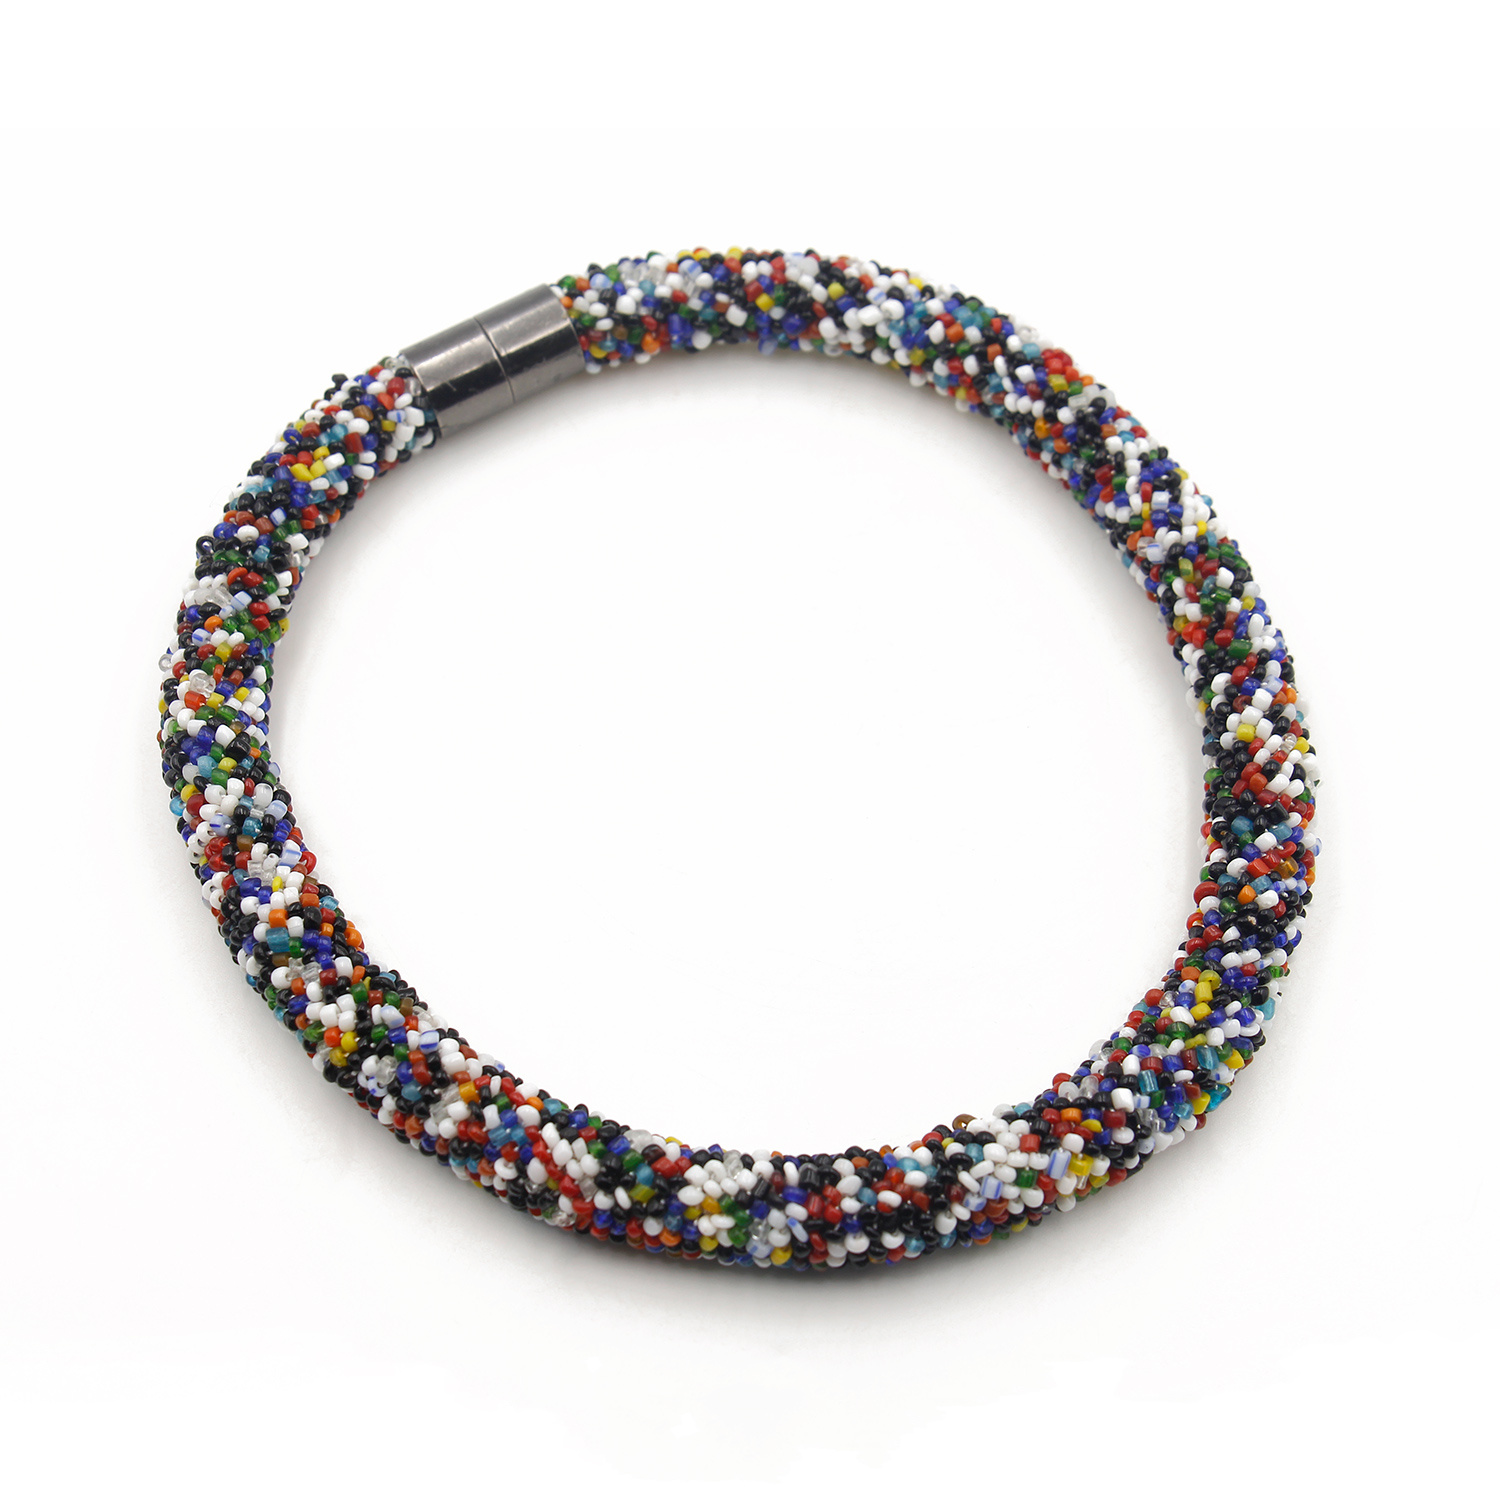 Necklace by Ulli Kaiser